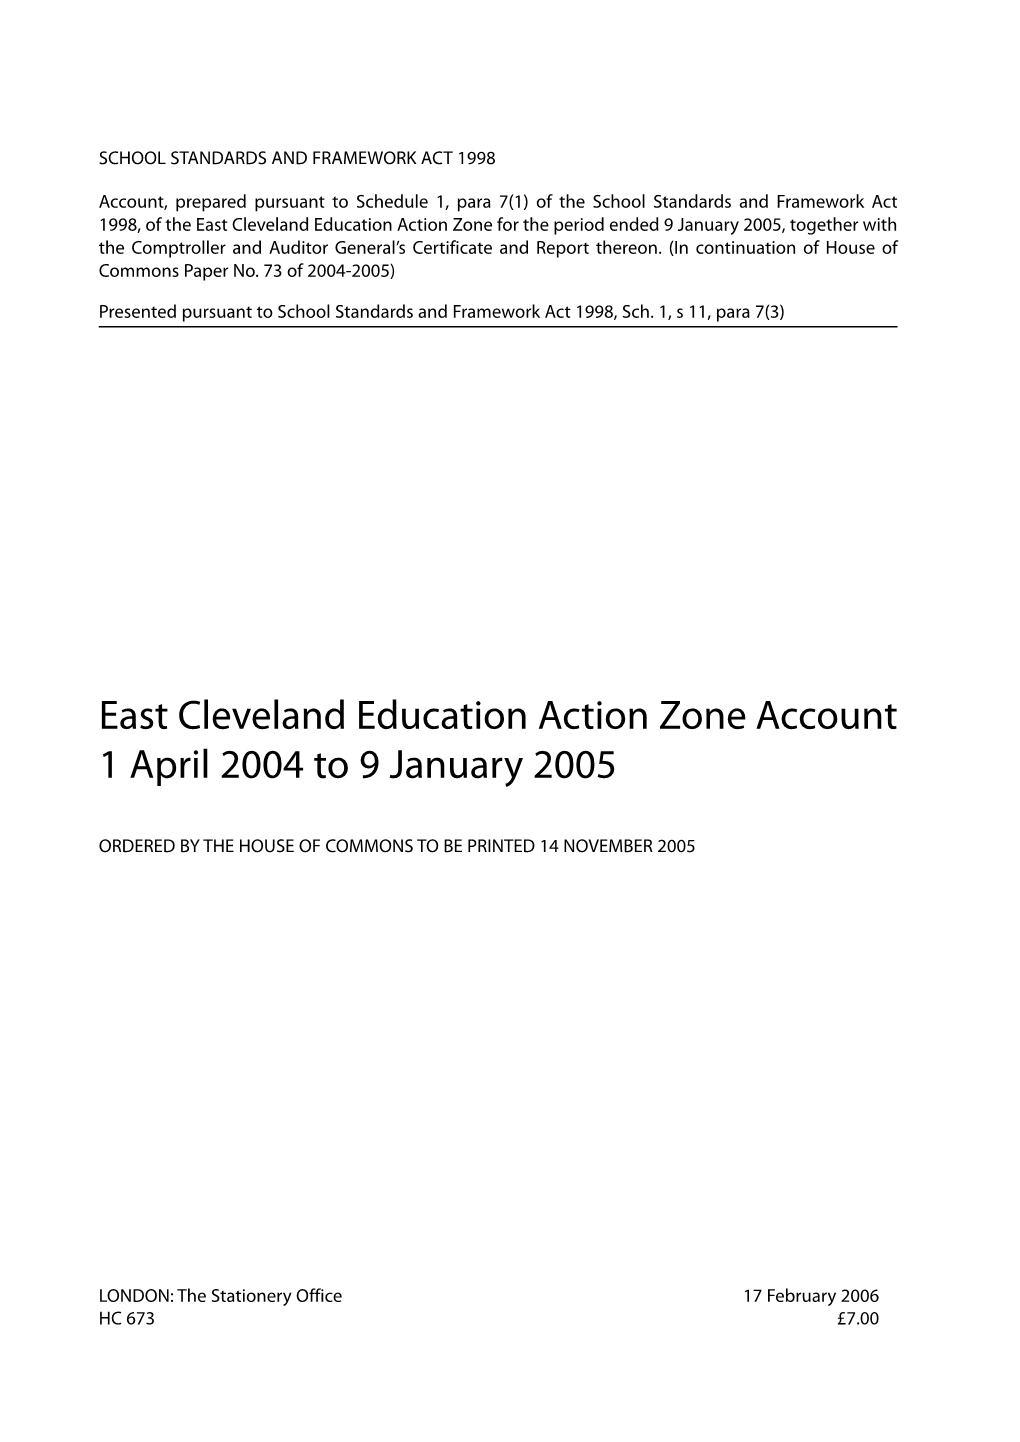 East Cleveland Education Action Zone Account 1 April 2004 to 9 January 2005